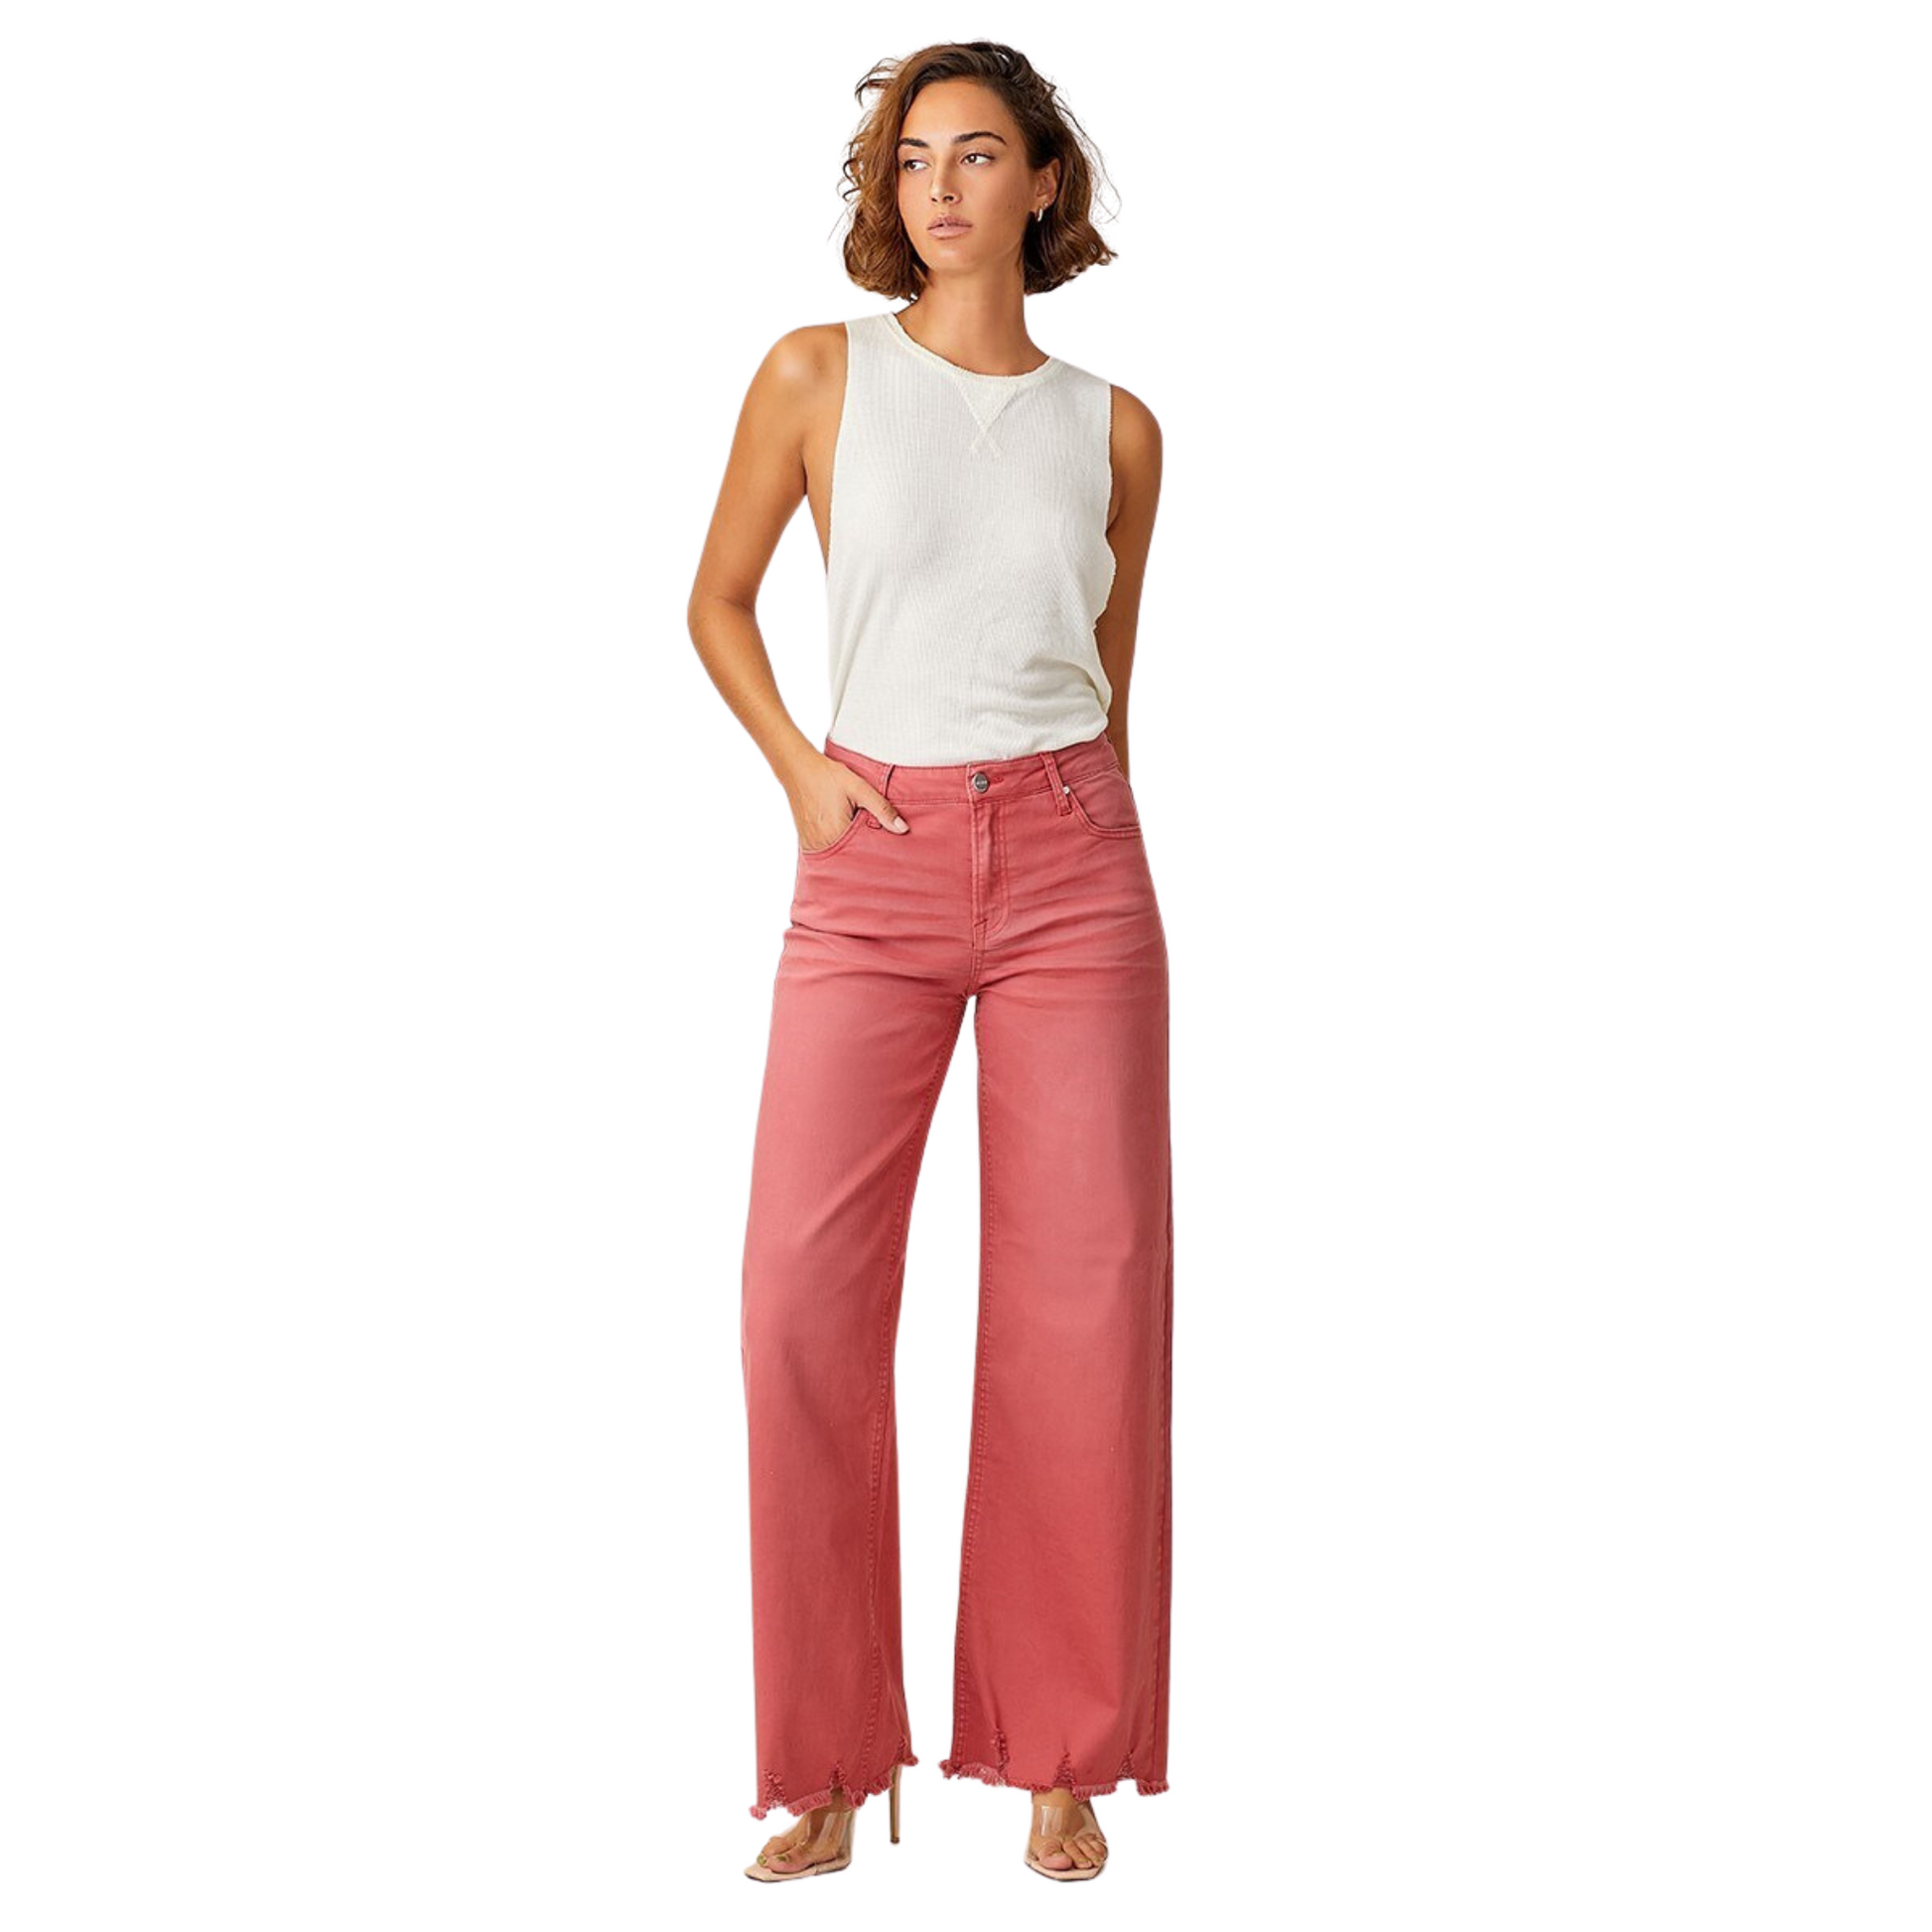 High-rise flare jeans from Risen Brand boast a brick color and raw hem for a modern twist. The flare gives them a stylish silhouette with timeless appeal. Crafted using quality fabric, these jeans are a perfect addition to any wardrobe.